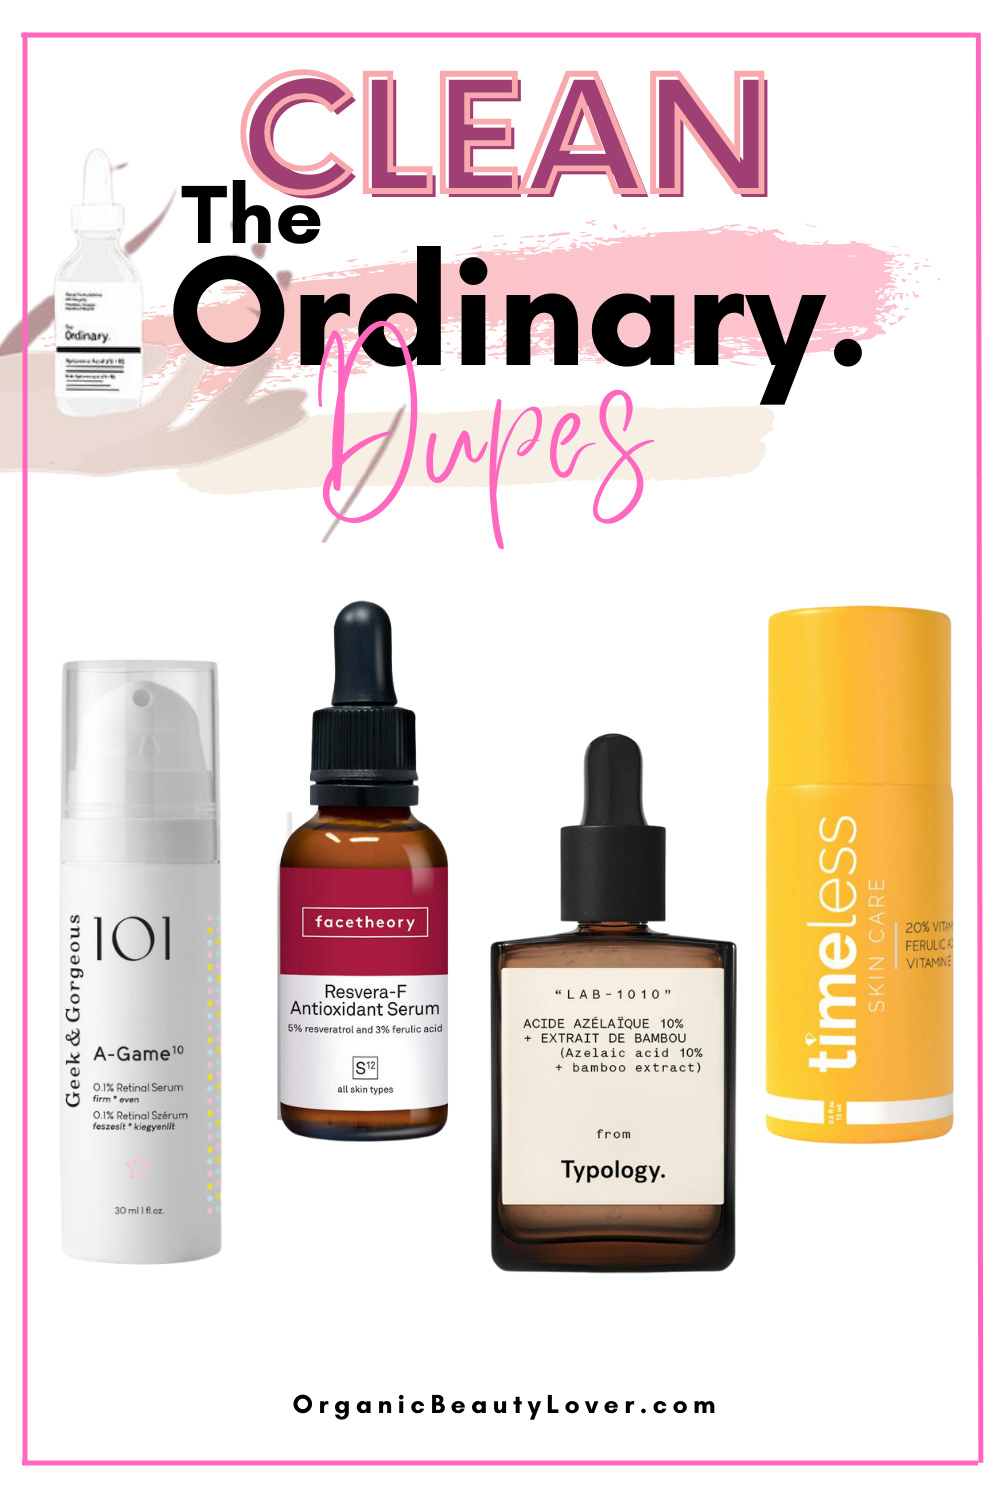 The Ordinary dupes natural 